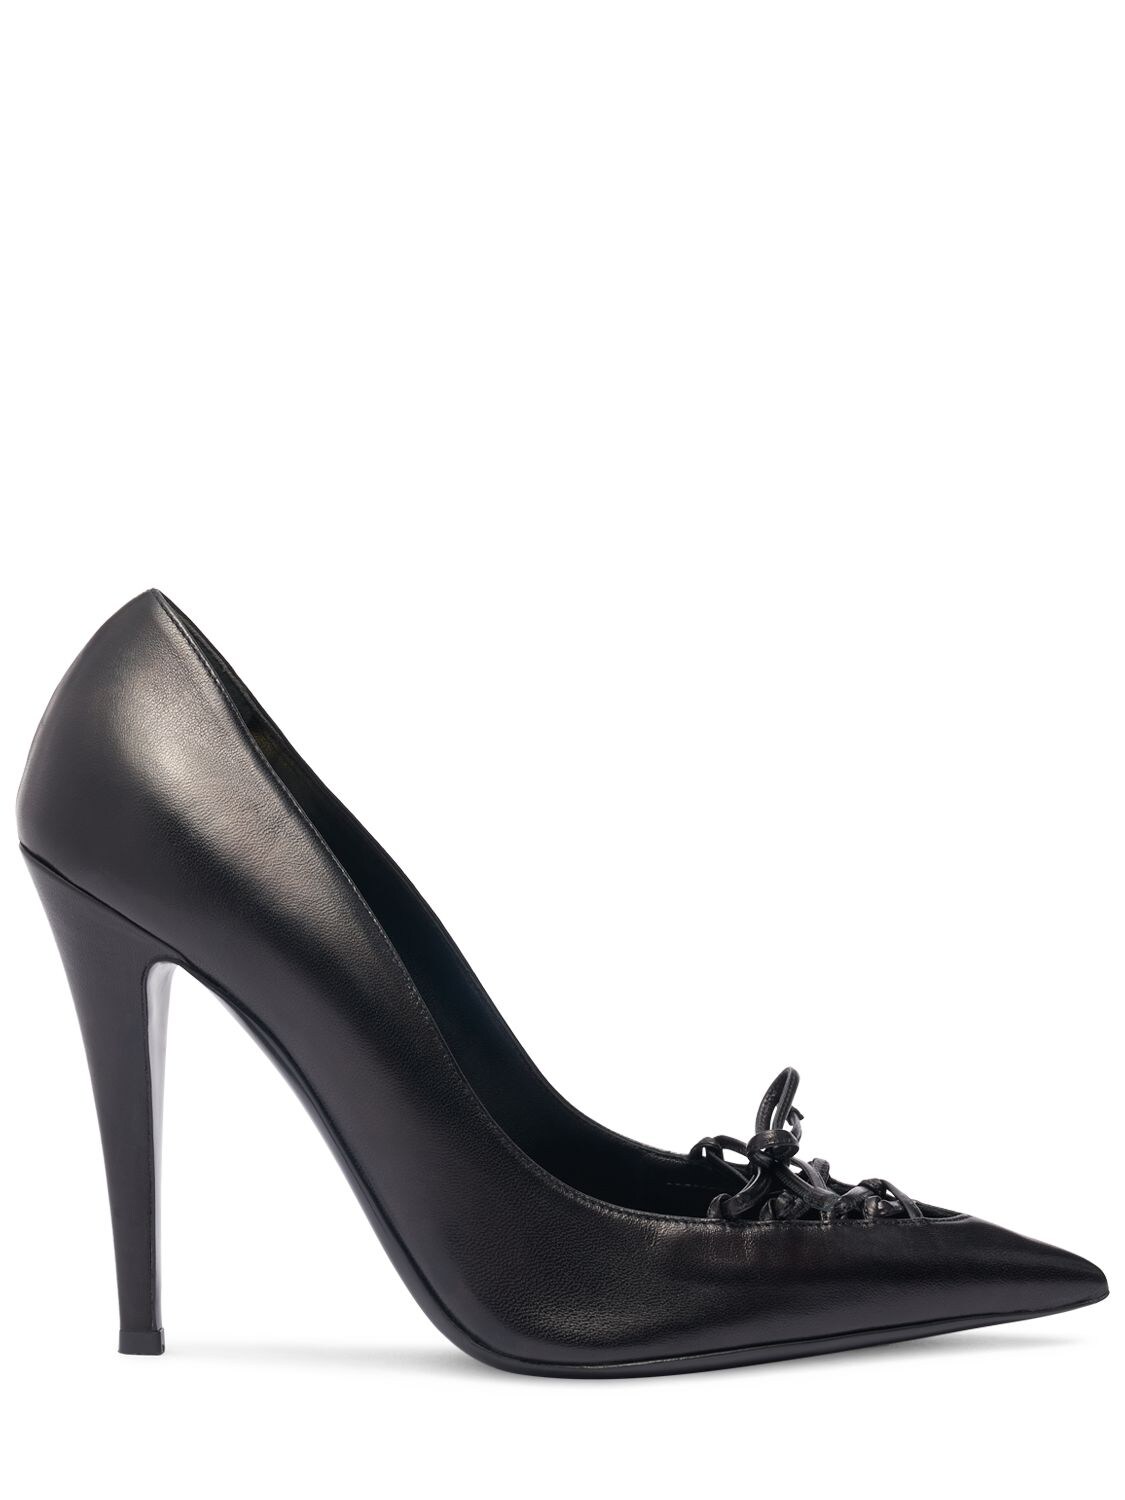 TOM FORD 105MM CORSET LEATHER PUMPS